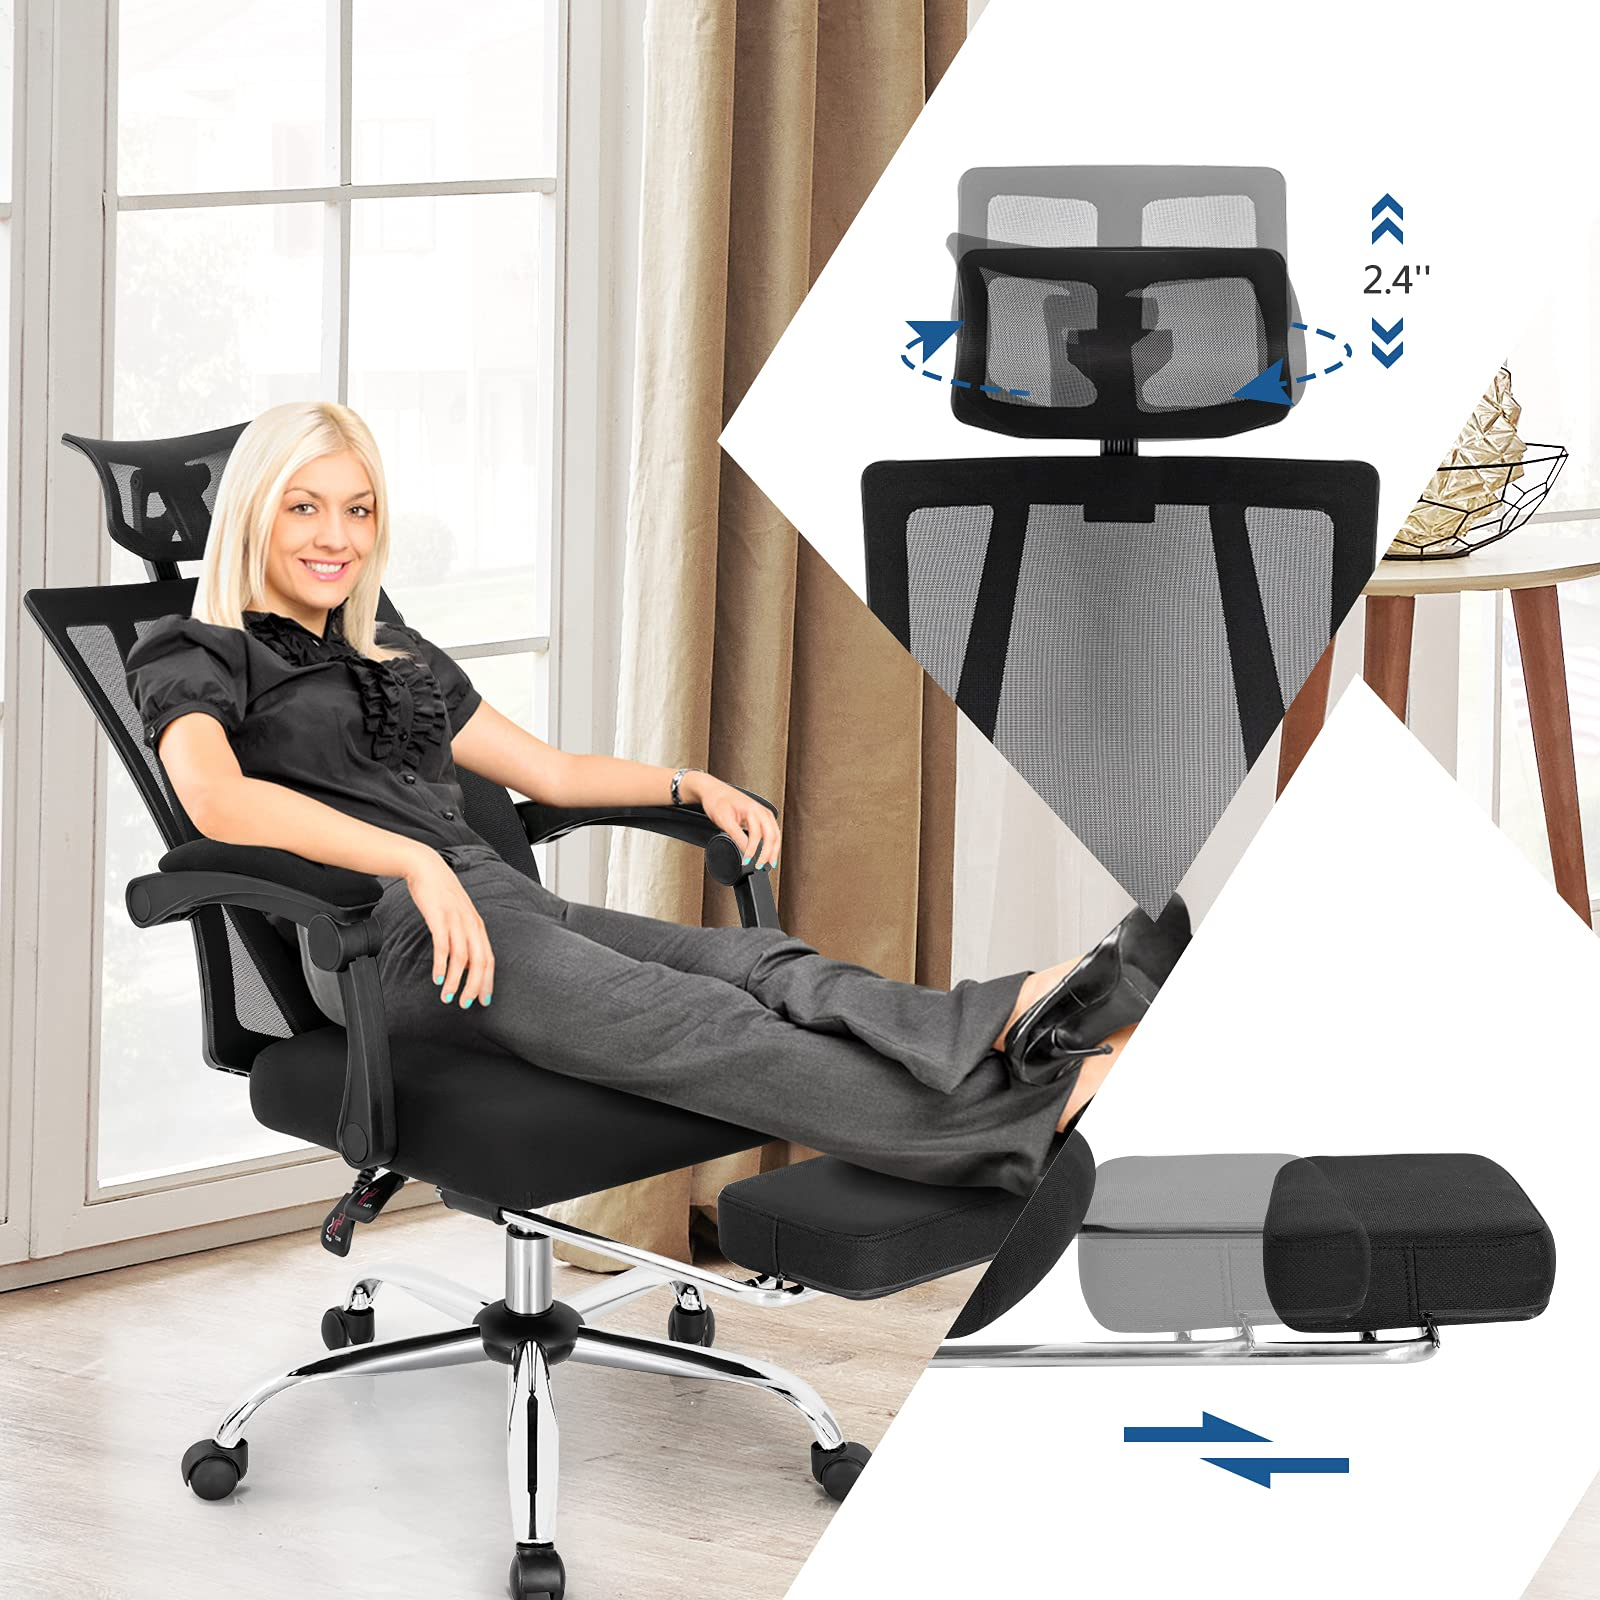 Giantex Swivel Rolling Executive Recliner Chair for Home Office Meeting Room